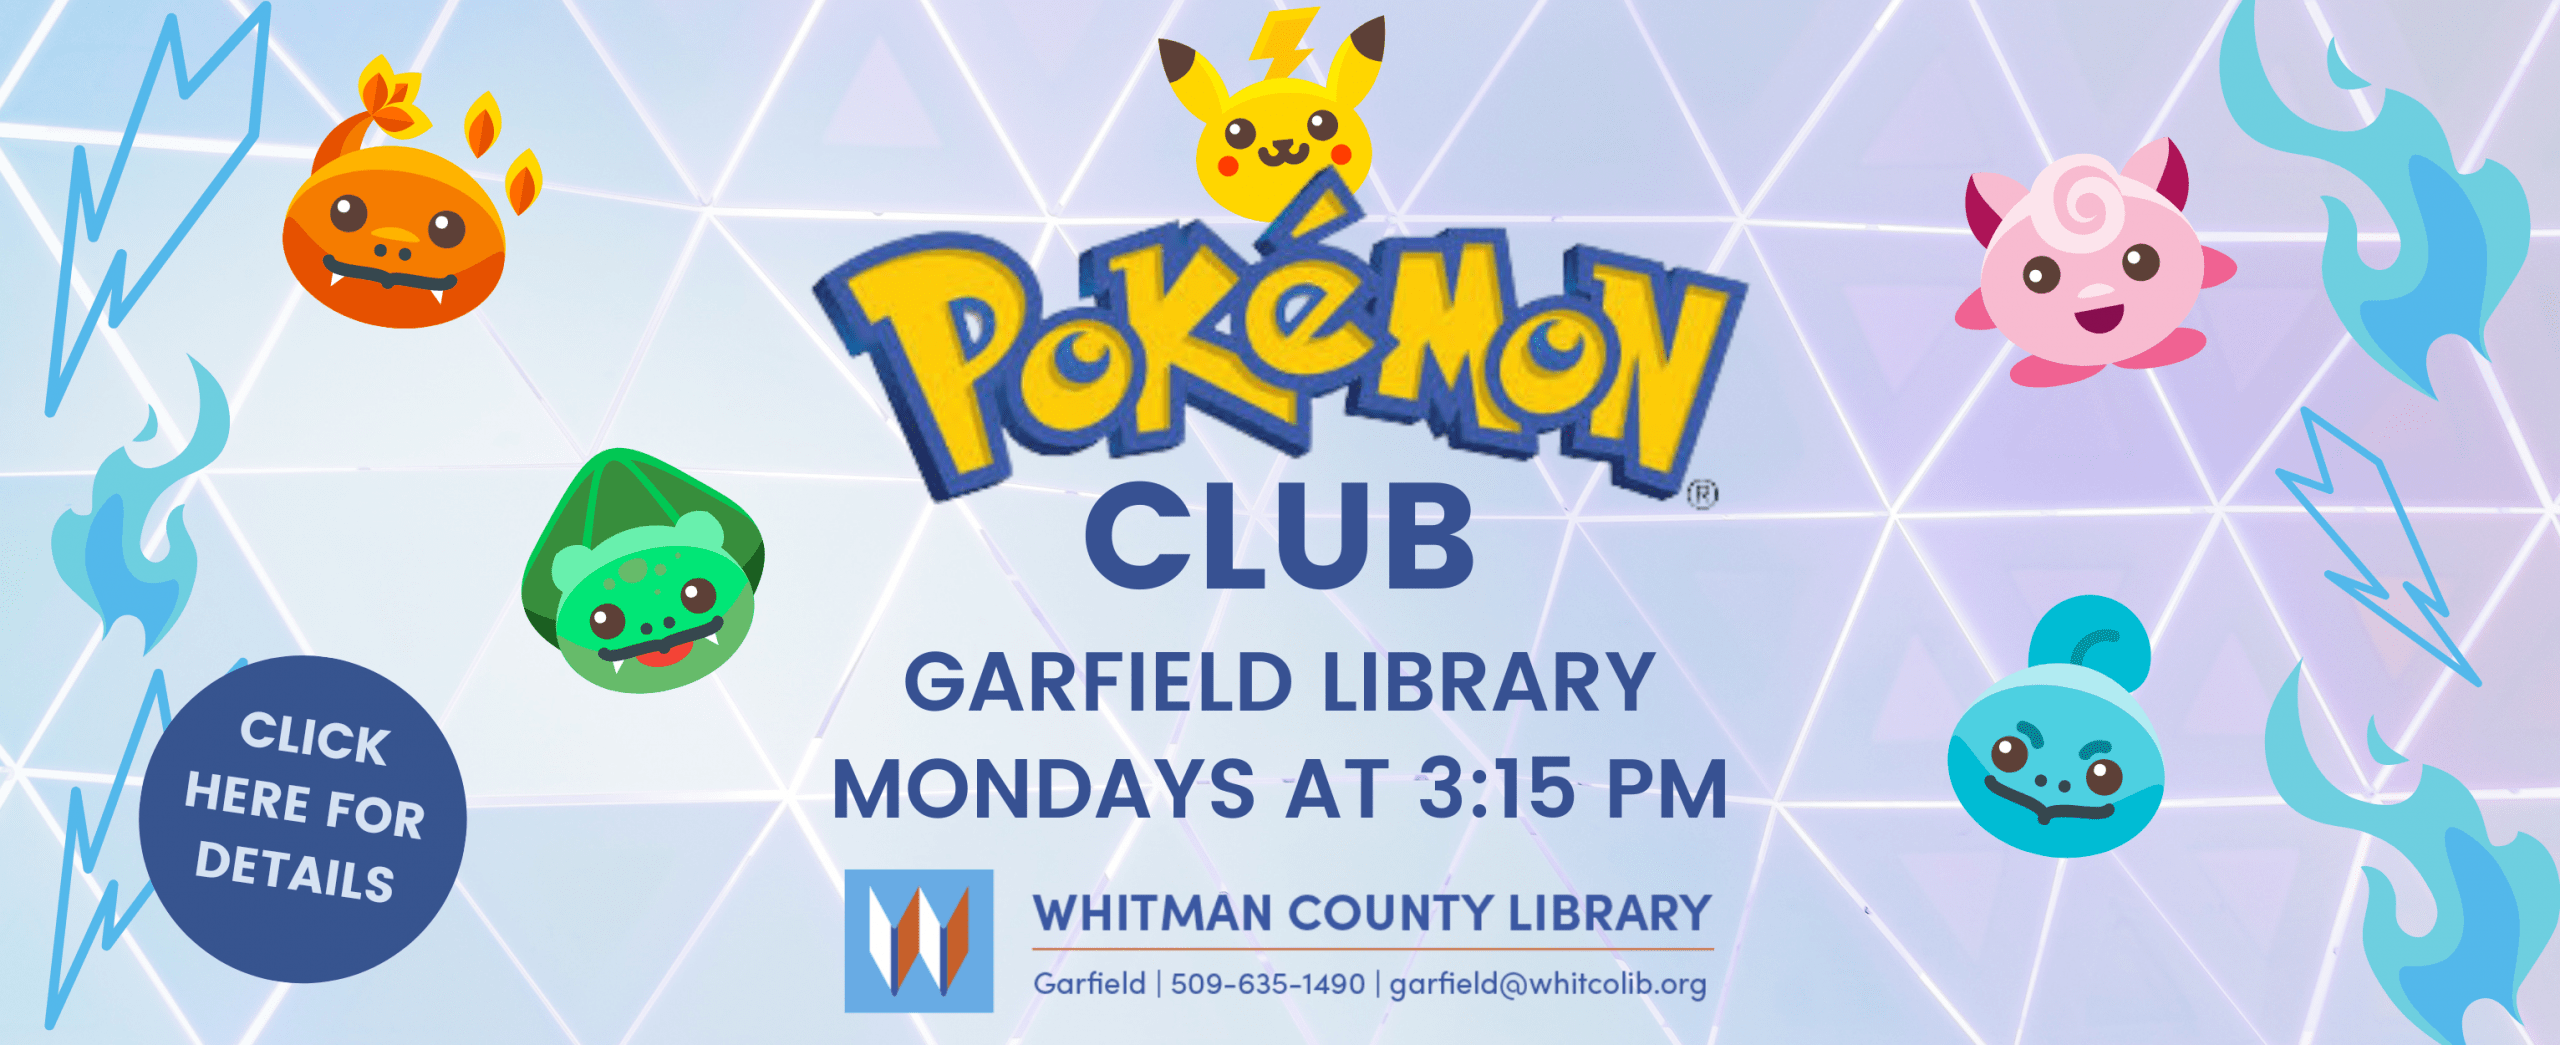 Pokemon Club is back at the Garfield Library on Mondays at 3:15 PM. Click here for details. 